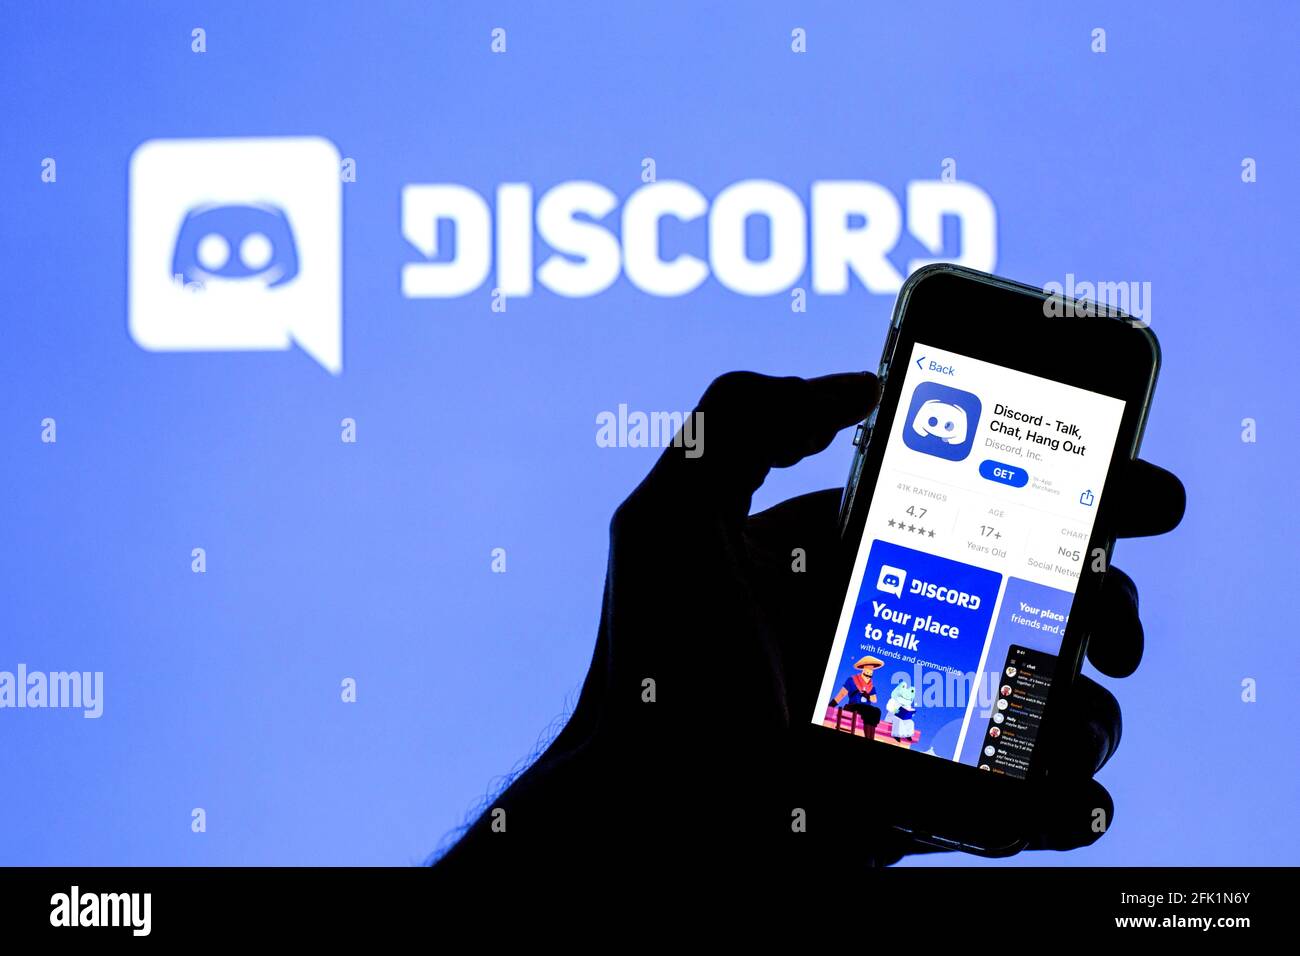 Discord - Chat, Talk & Hangout on the App Store